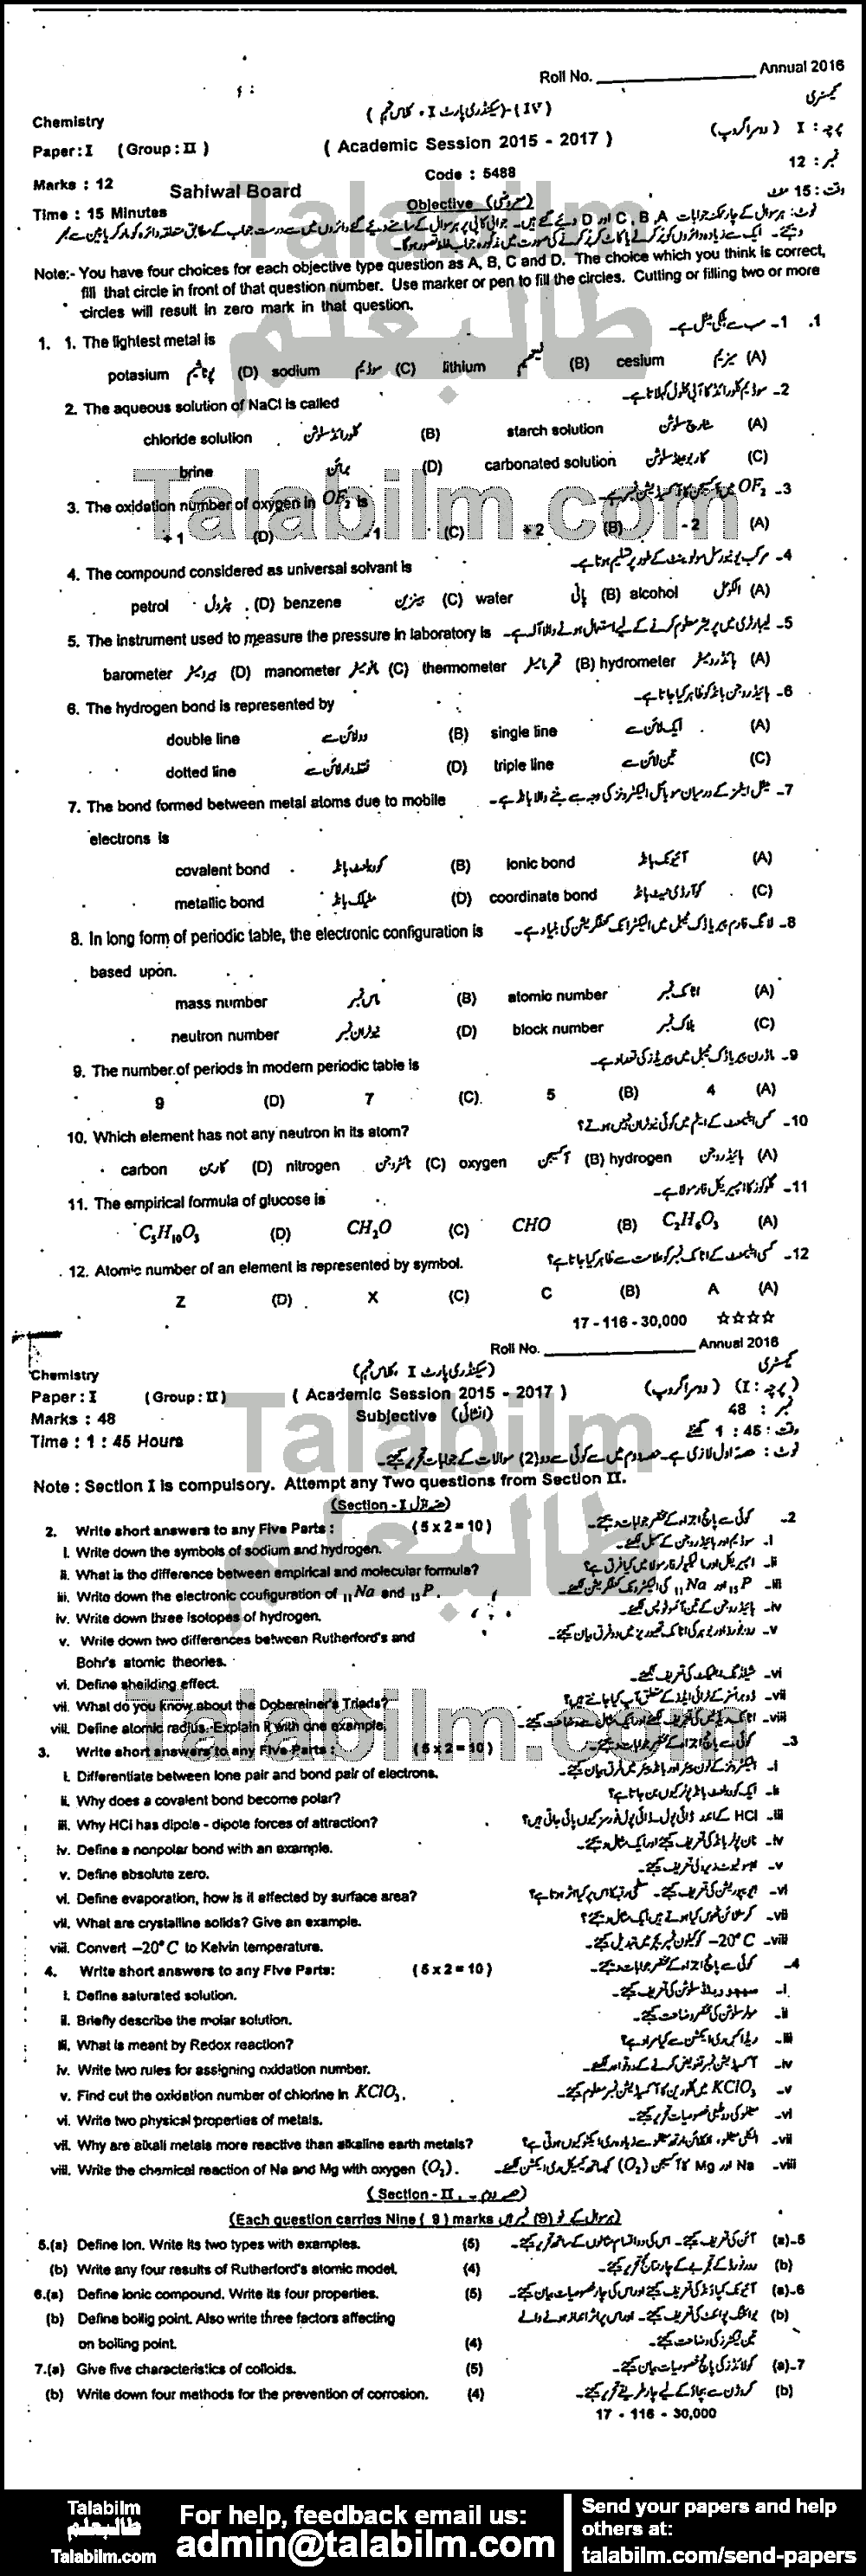 Chemistry 0 past paper for 2016 Group-II